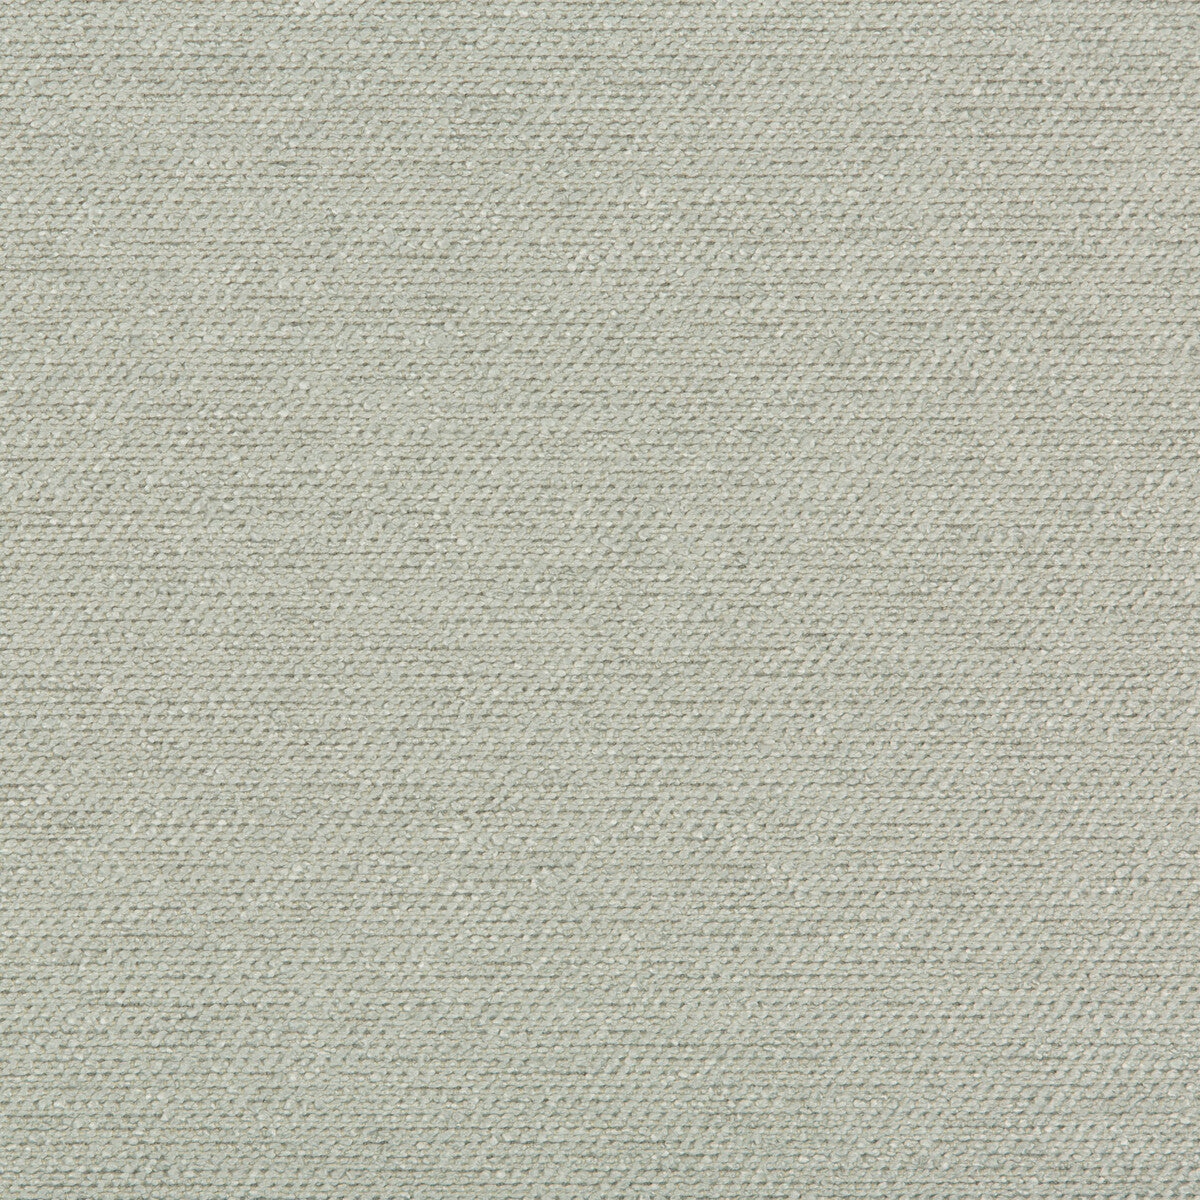 Kravet Contract fabric in 35142-11 color - pattern 35142.11.0 - by Kravet Contract in the Incase Crypton Gis collection